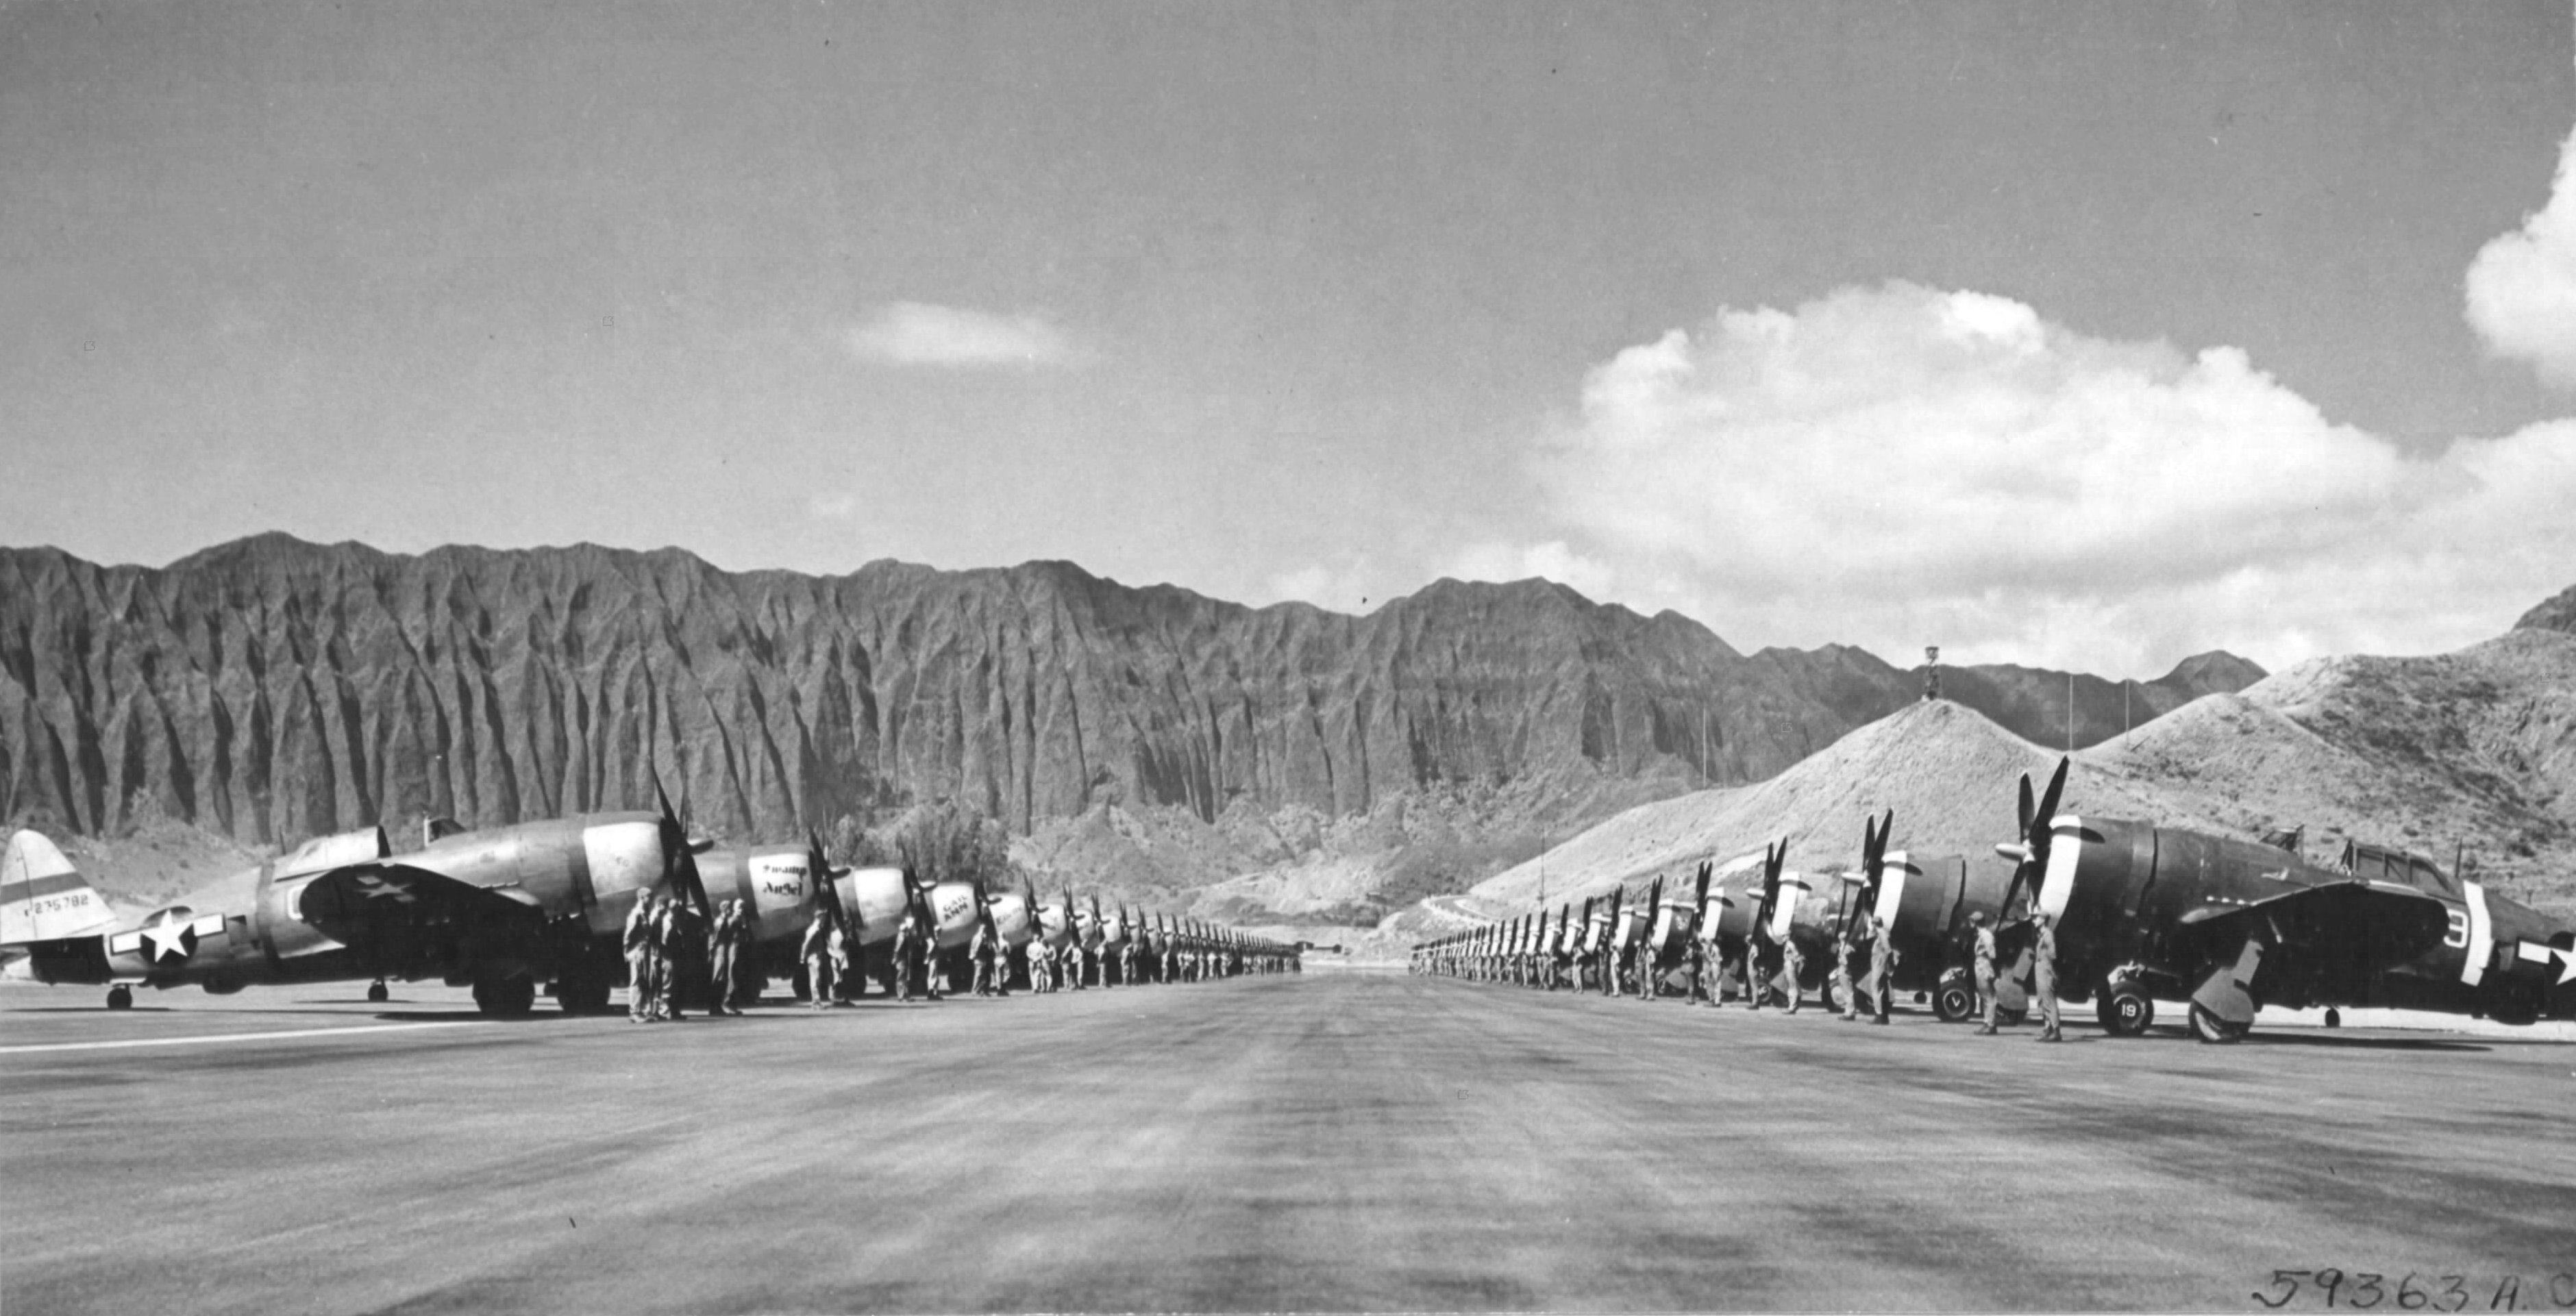 P-47 Thunderbolt aircraft of the 318th Fighter Group lined up for an inspection at Bellows Field, Oahu, US Territory of Hawaii, 15 May 1944. Photo 1 of 8.